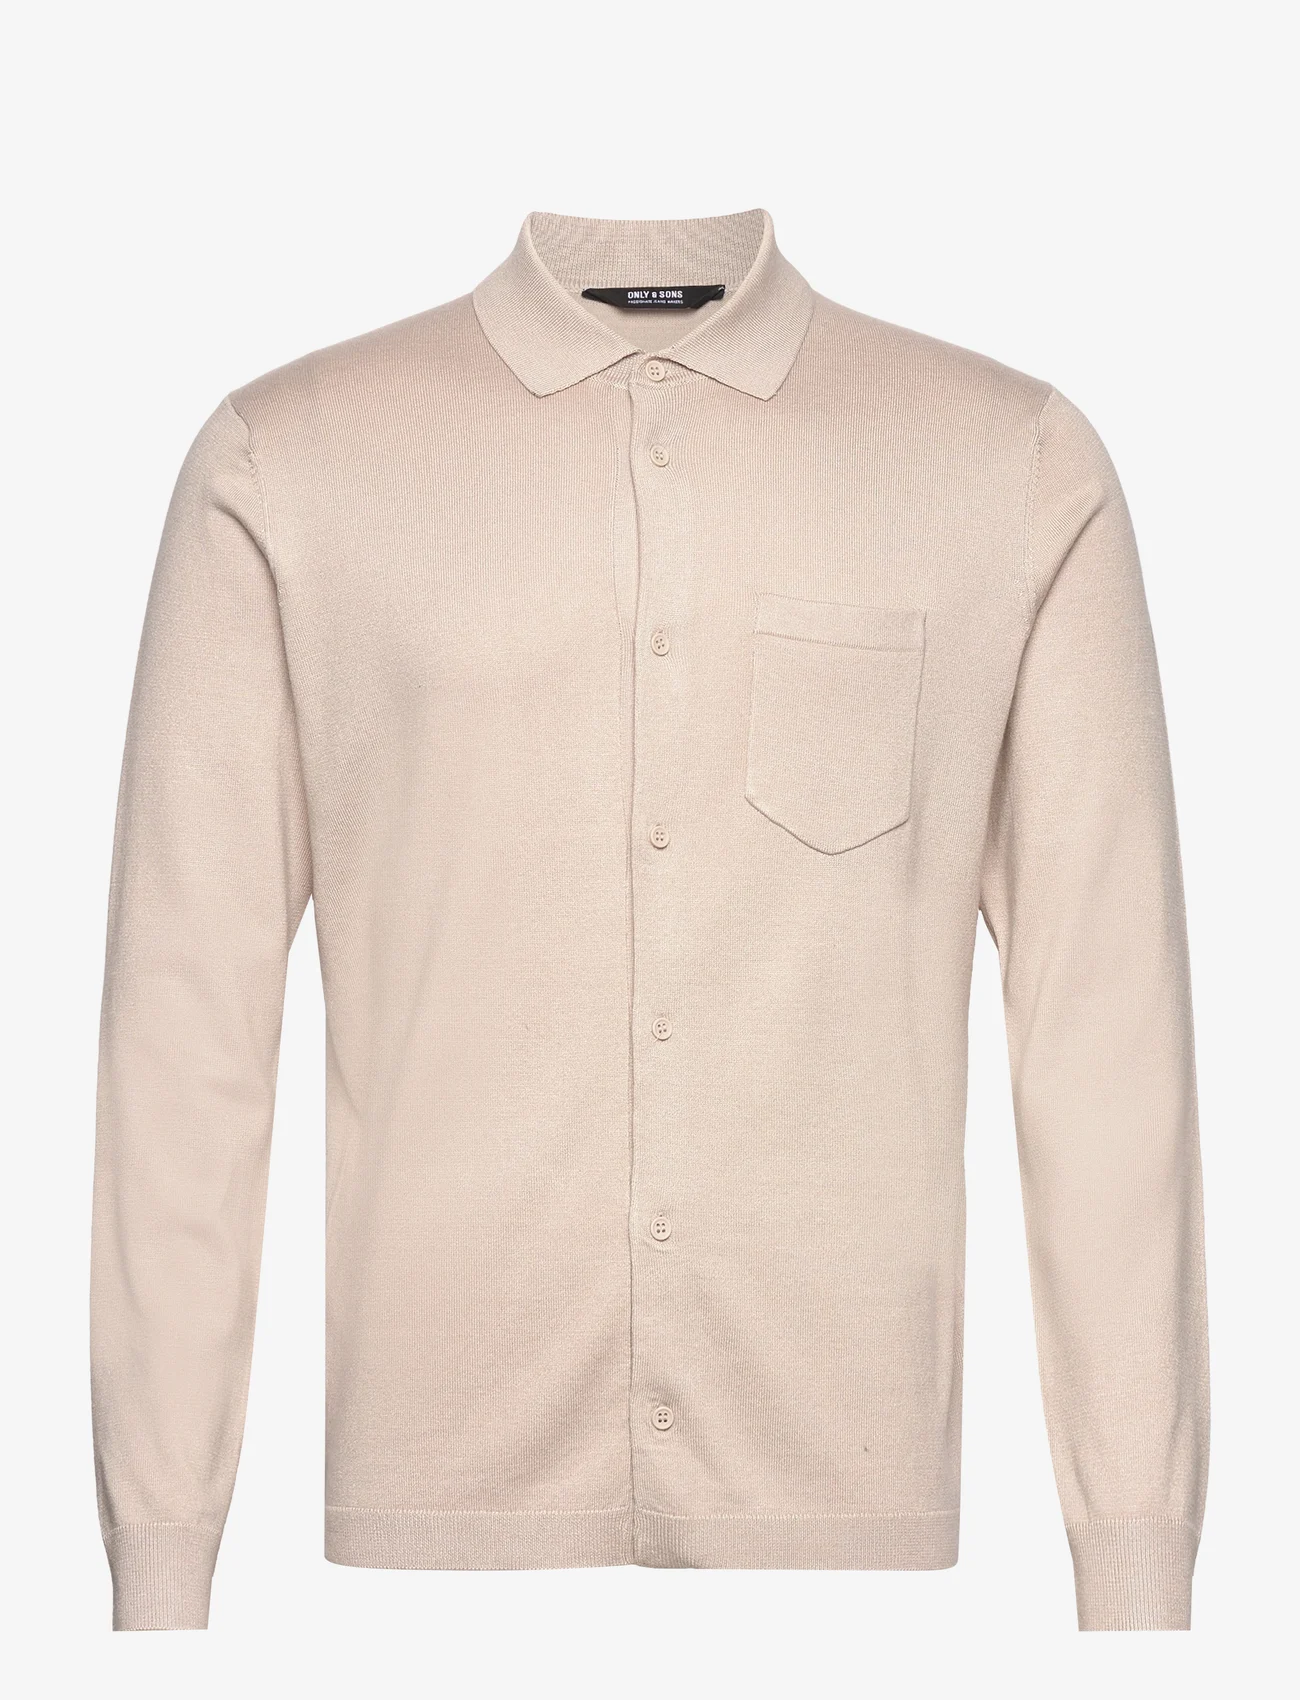 ONLY & SONS - ONSWYLER LIFE REG 14 LS SHIRT KNIT - polostrik - silver lining - 0